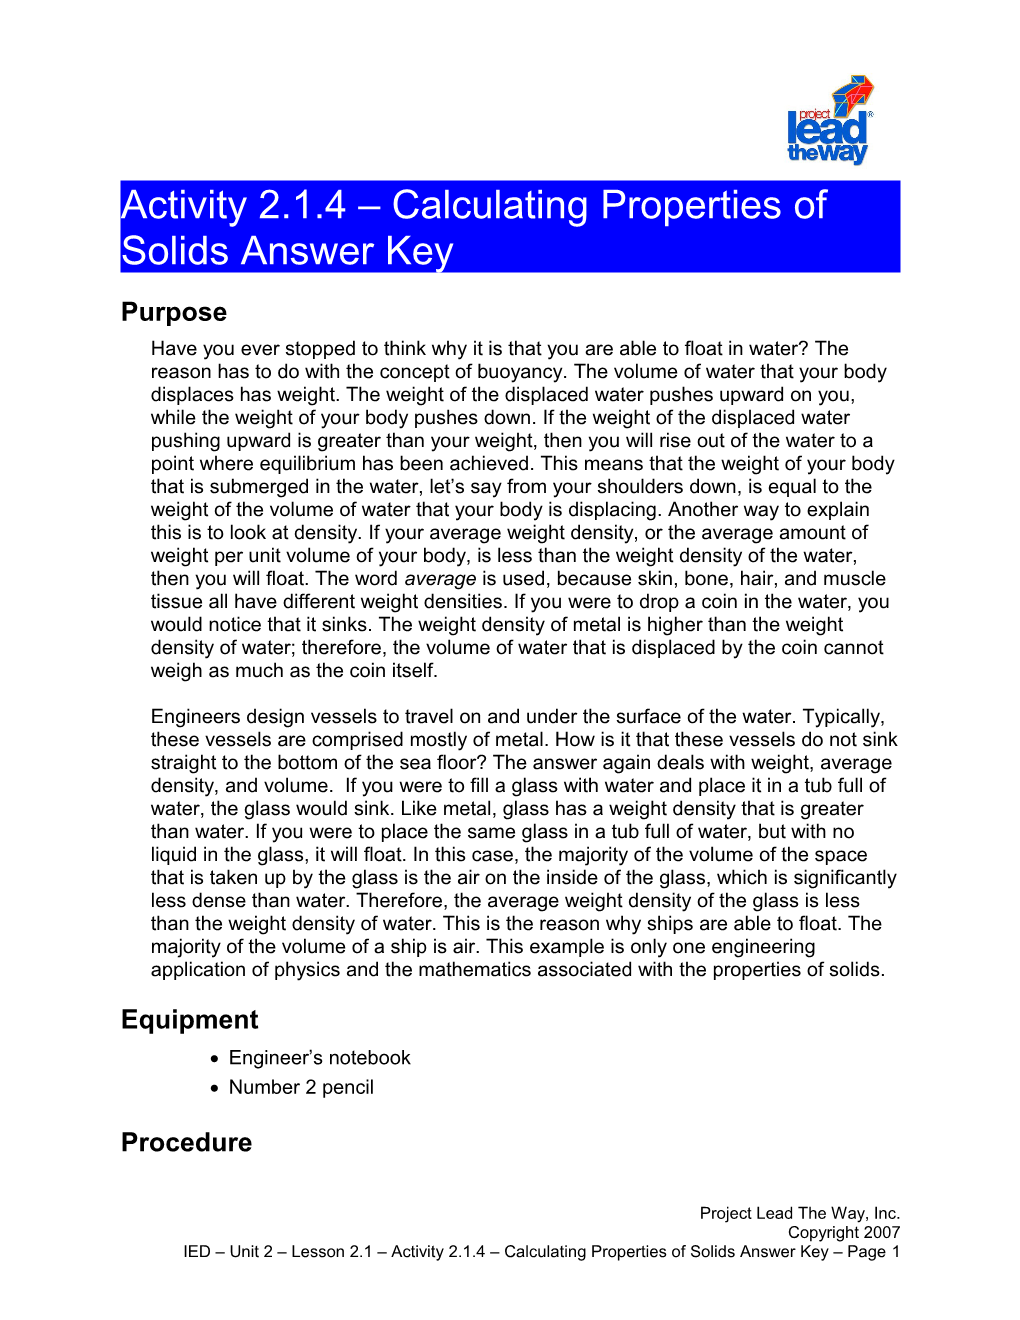 Activity 2.1.4: Calculating Properties Of Solids Answer Key